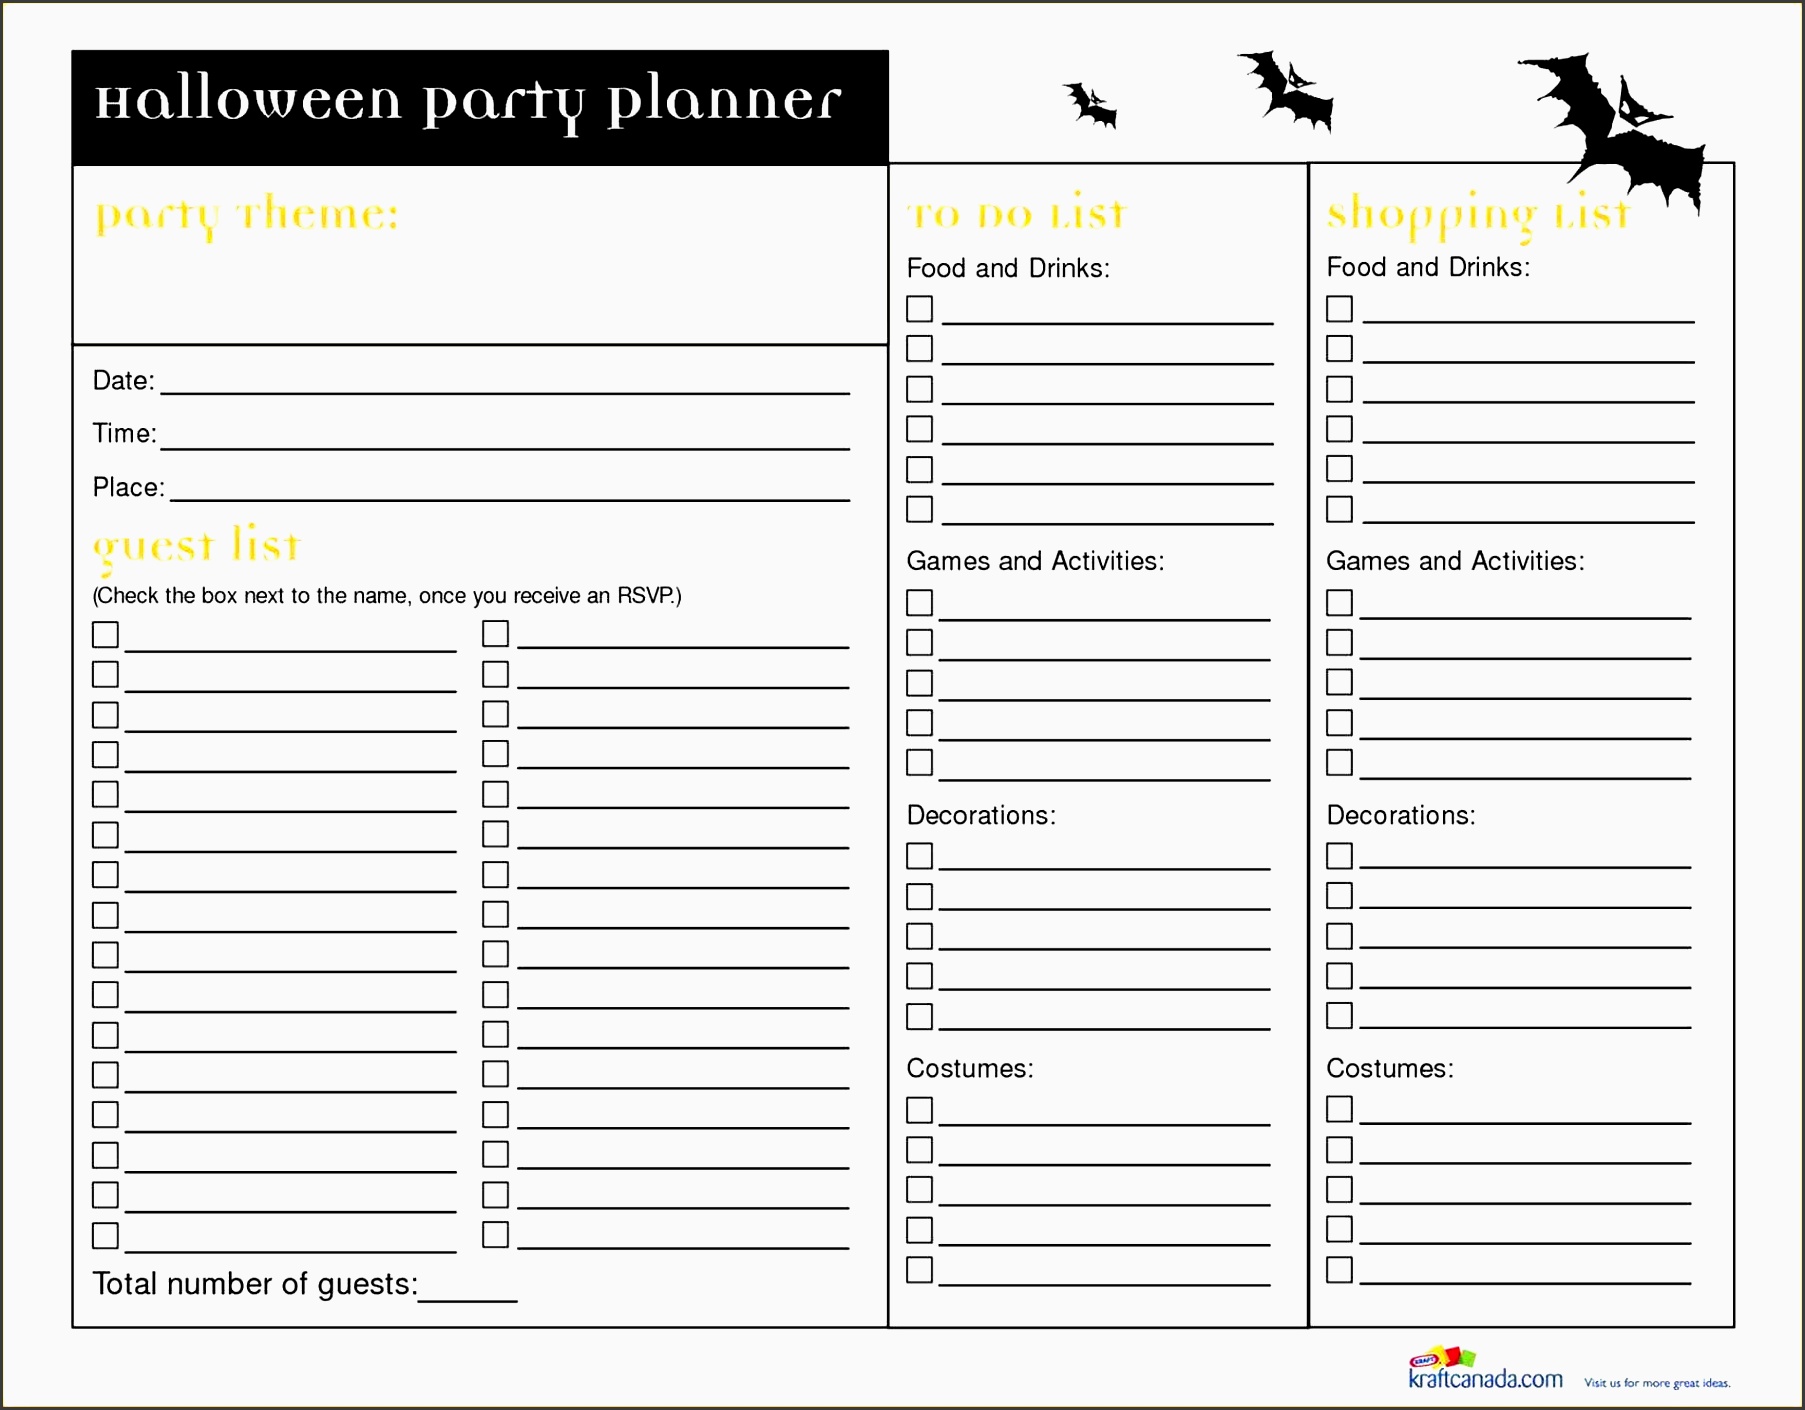 confetti kids party planner template by createitpl event sheet templatez event party planner template sheet